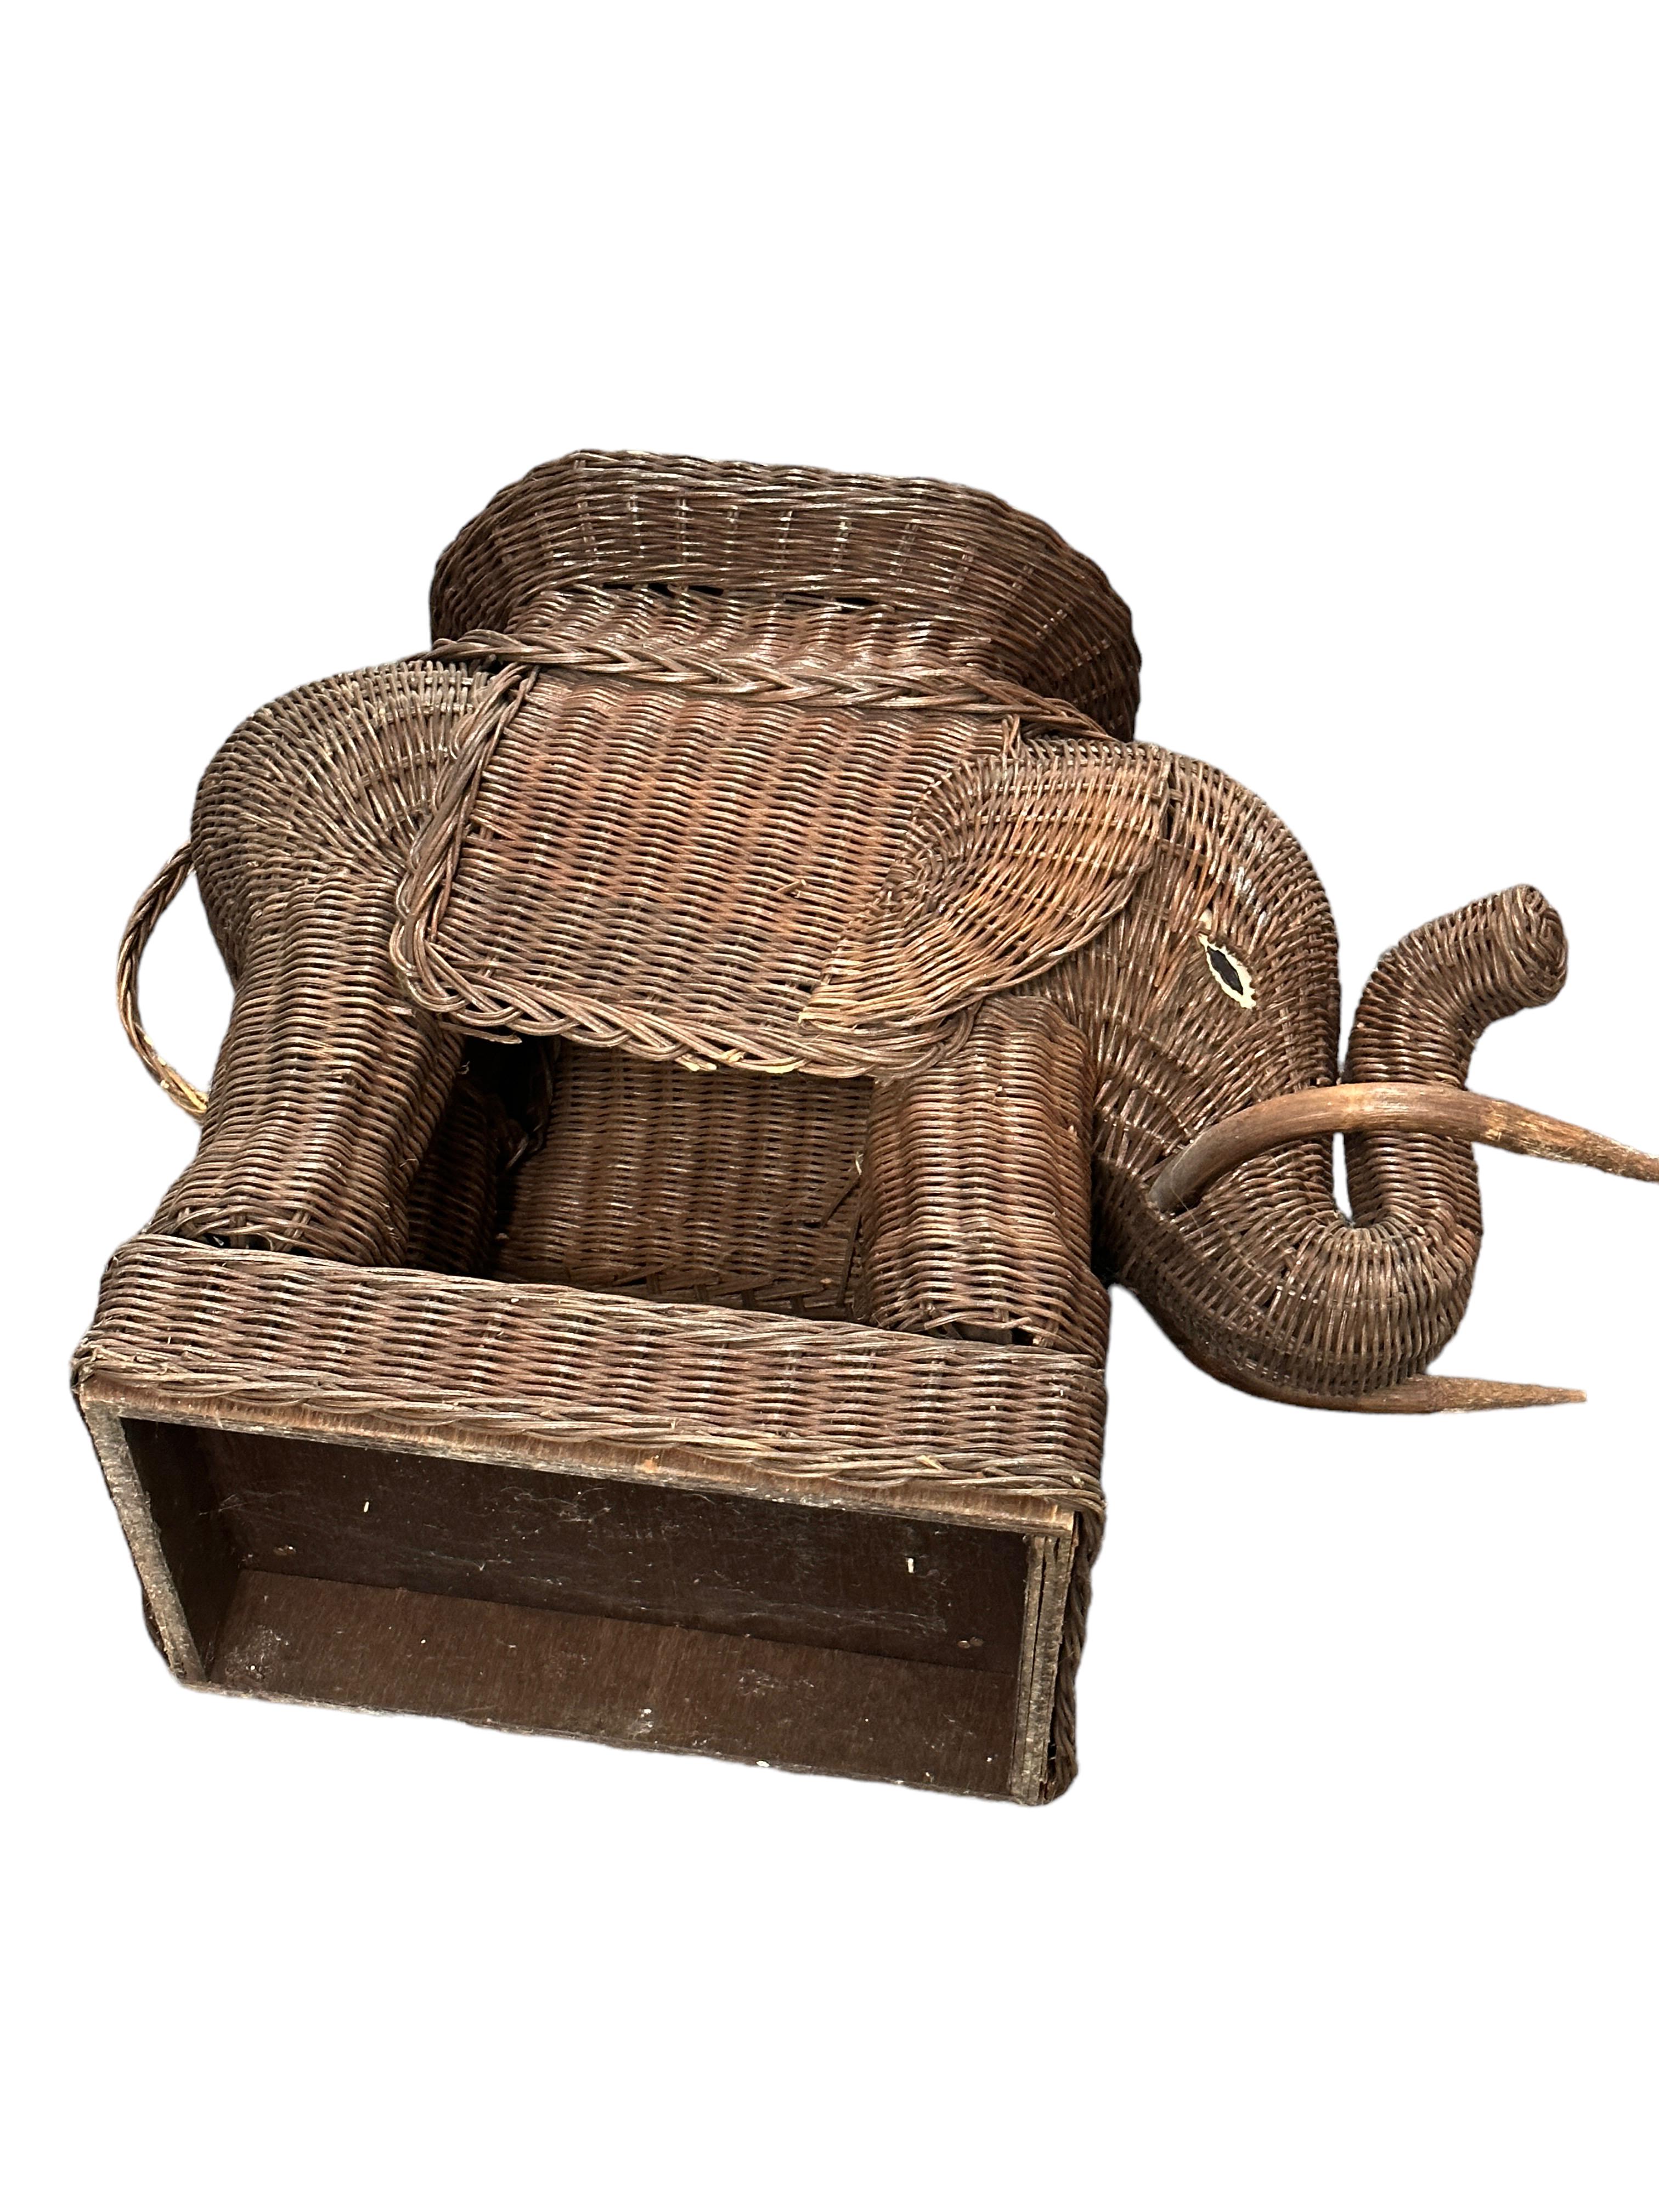 Stunning Rattan Wicker Elephant Side Table with Tray, France, 1960s For Sale 6